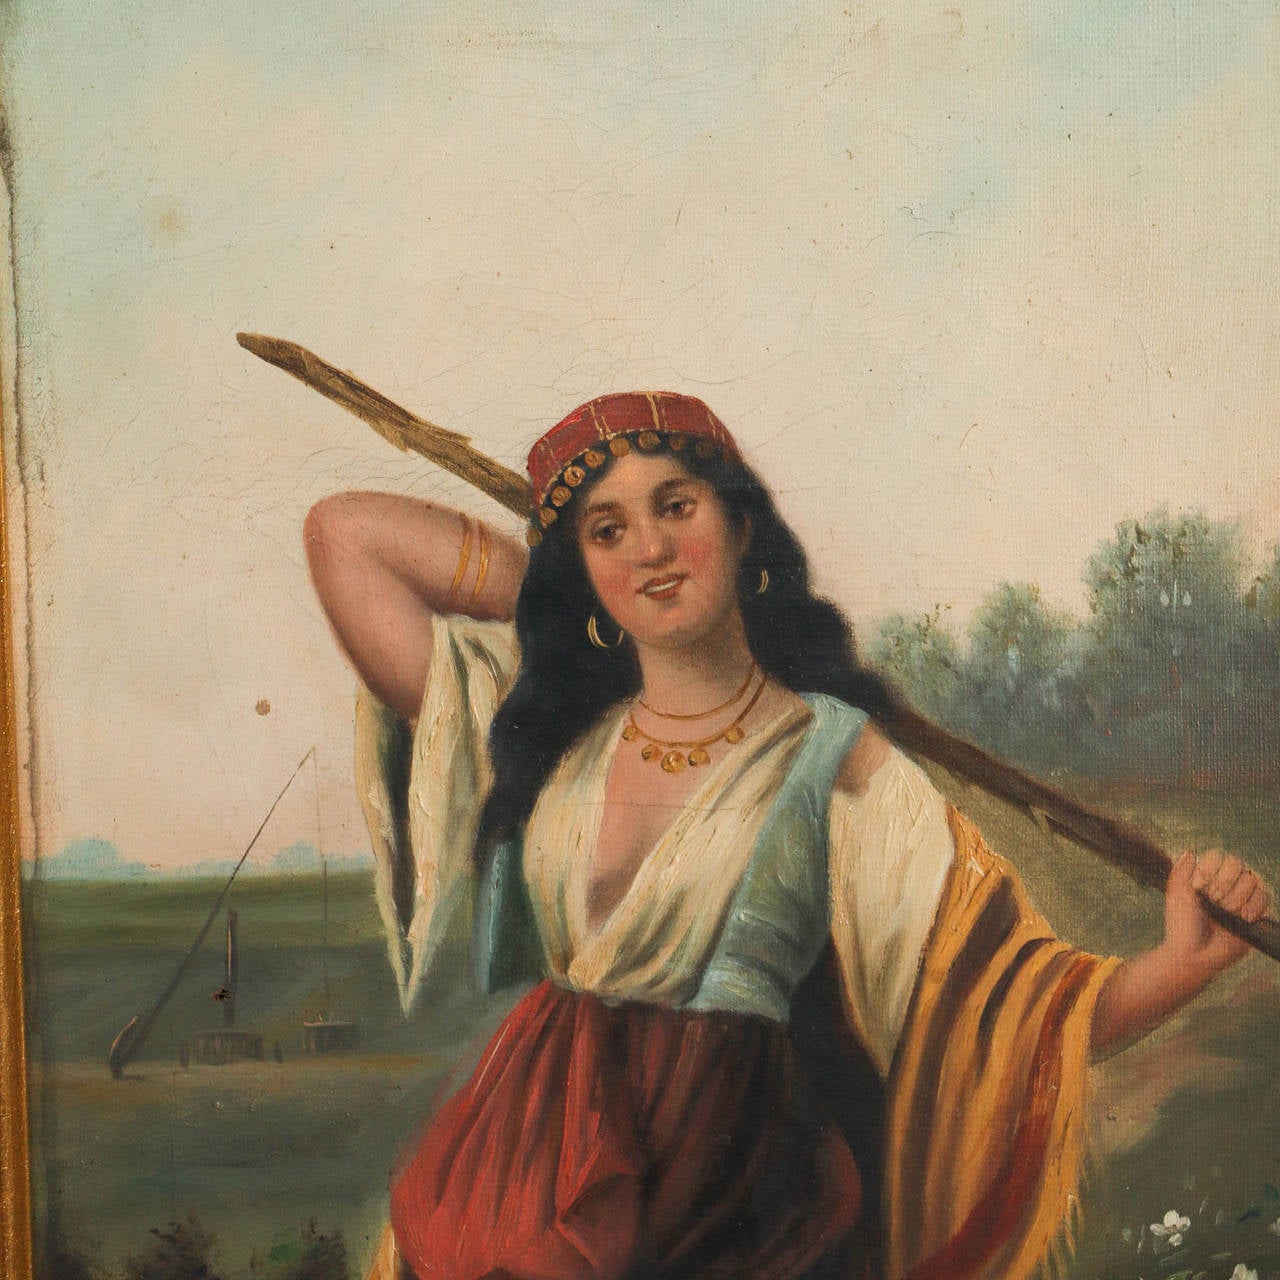 Original oil on canvas painting of a young woman in a southern European setting, The charm of this painting is in the country appeal of the girl, who has the appearance of a gypsy. The painting is mounted in a gold painted frame and signed in the